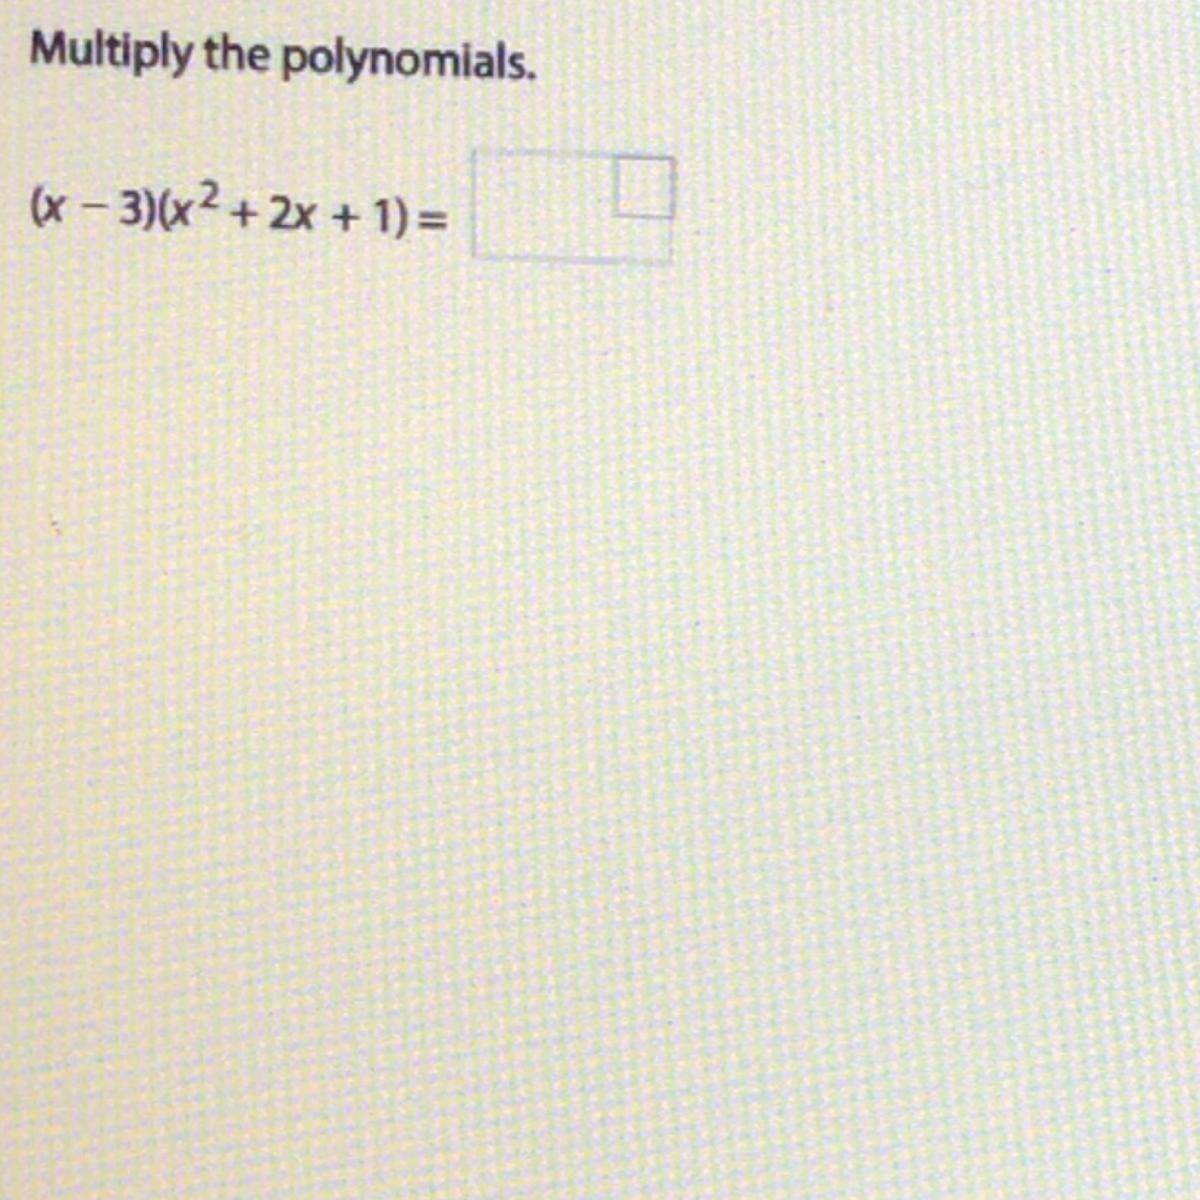 Multiply The Polynomials. (x-3)(x^2+2x+1)